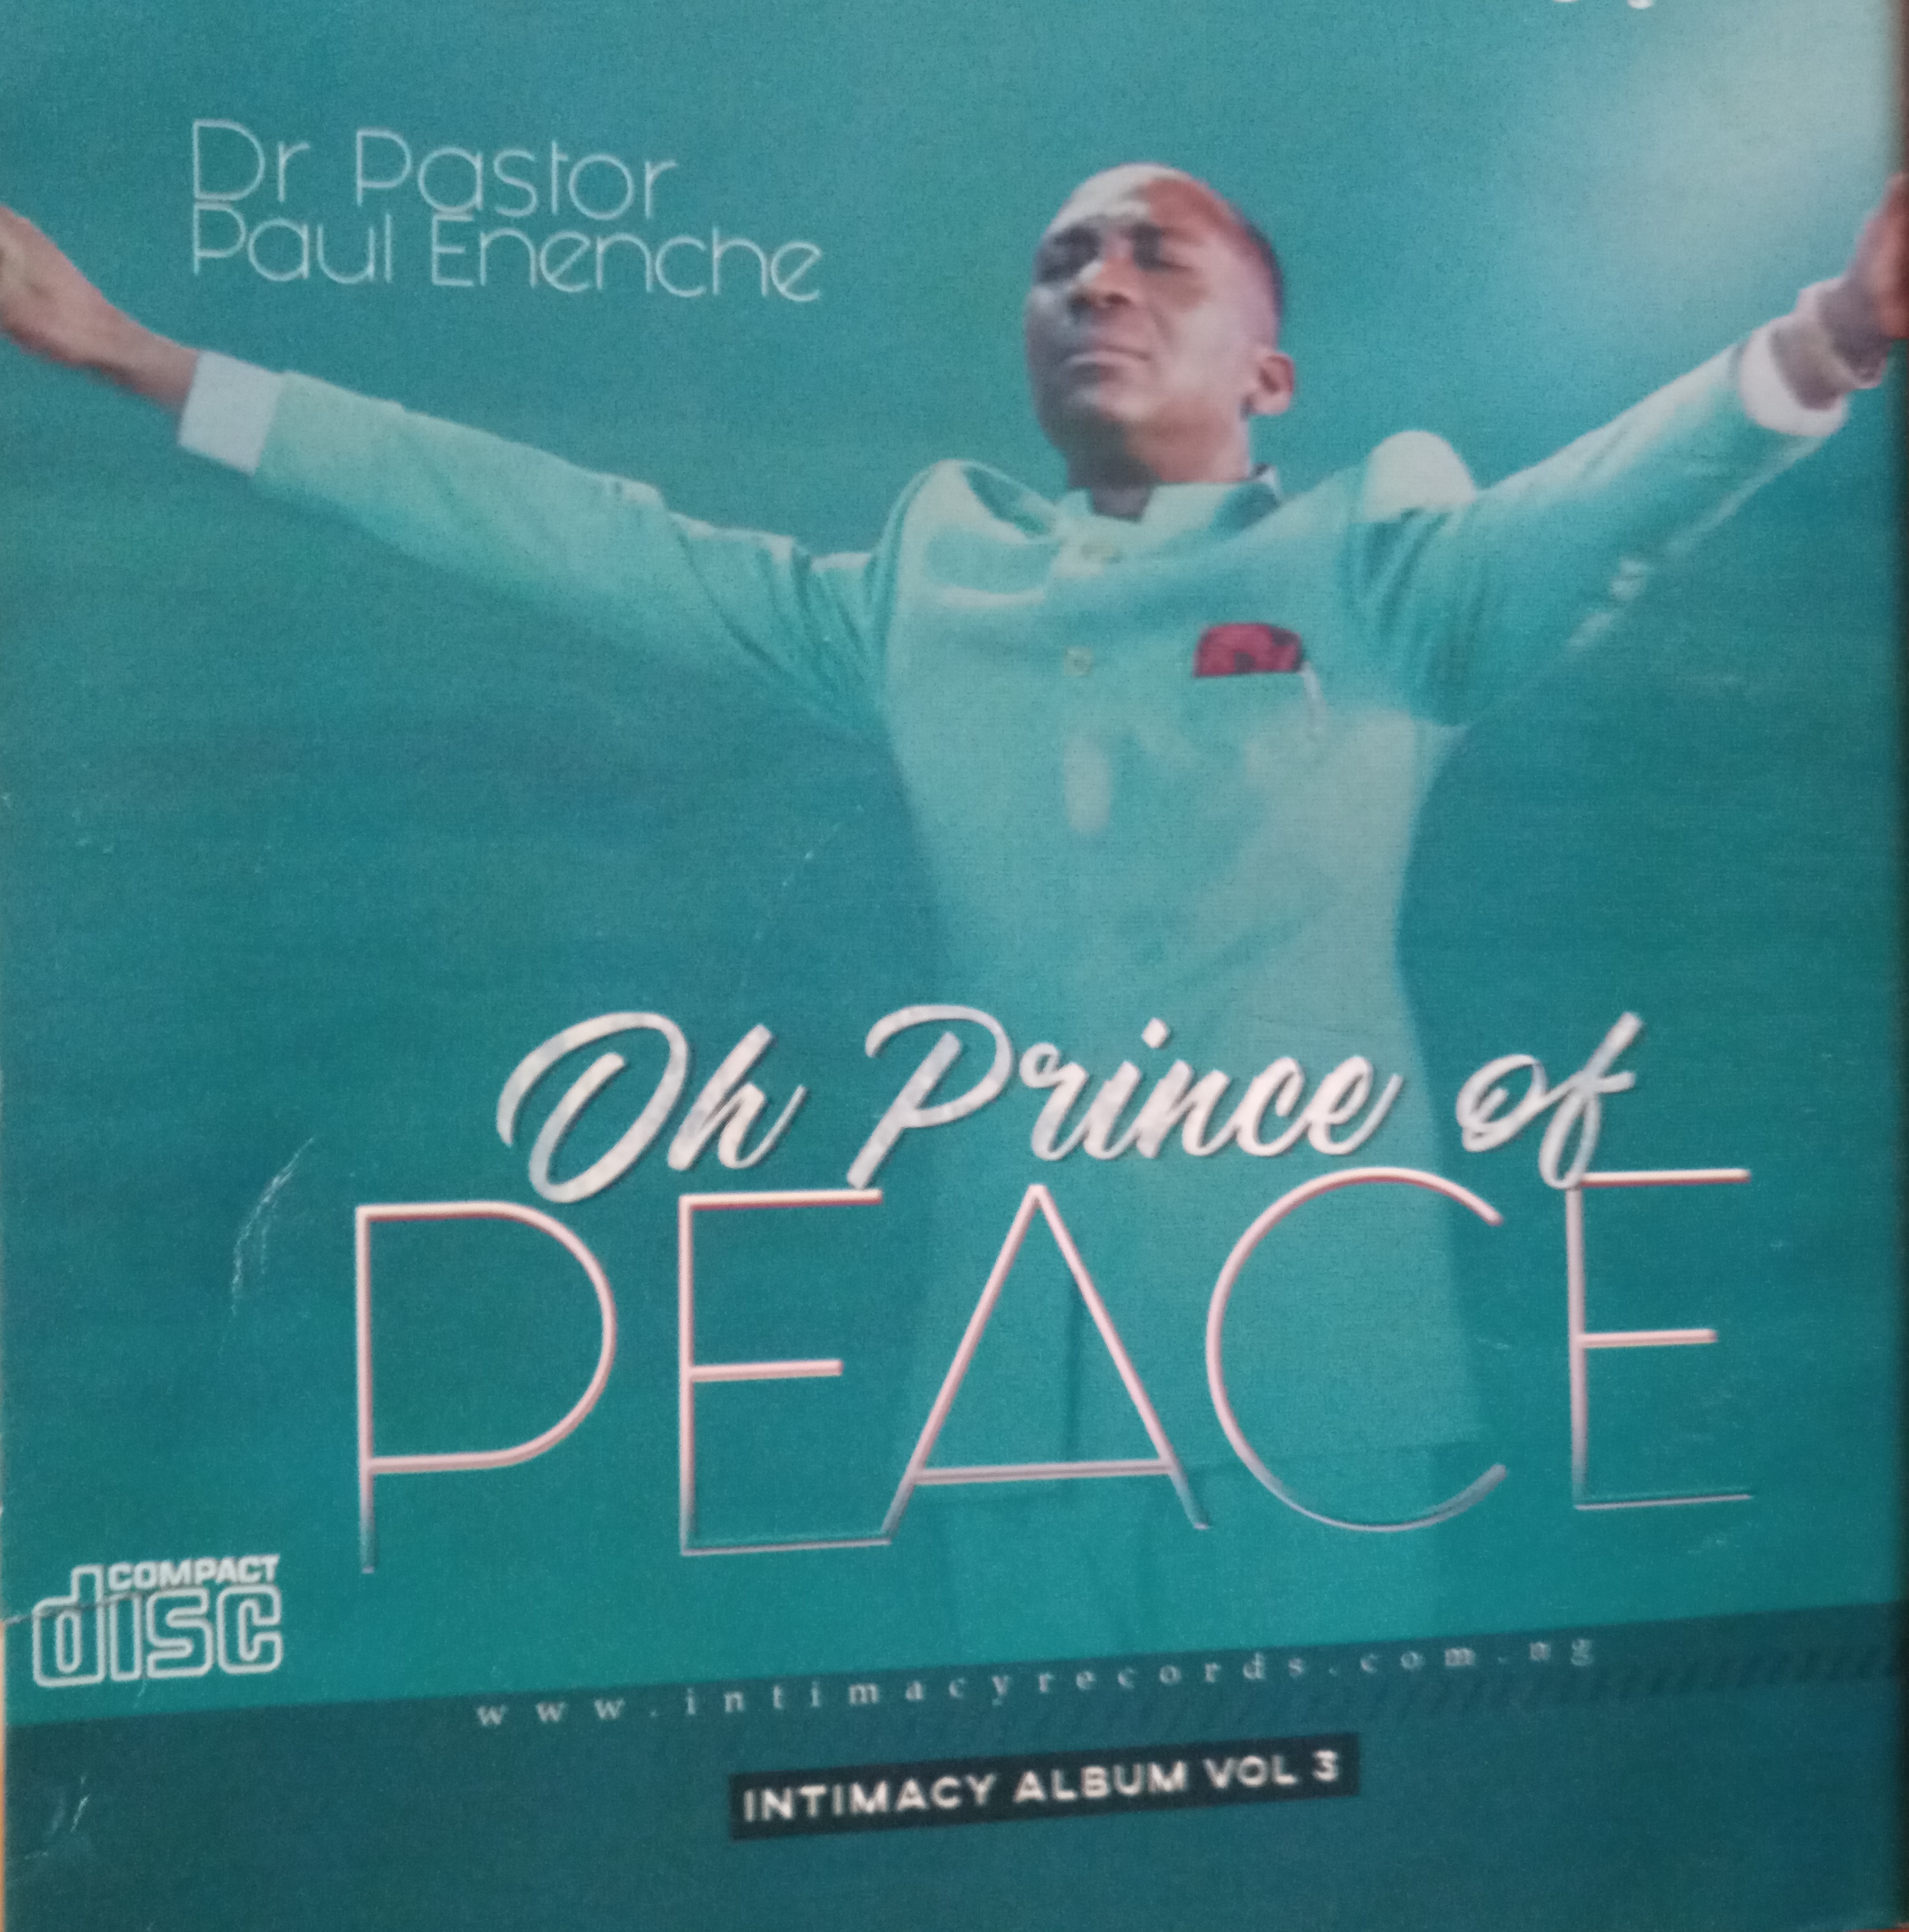 Turn It Around Live Worship mp3 by Dr Paul Enenche